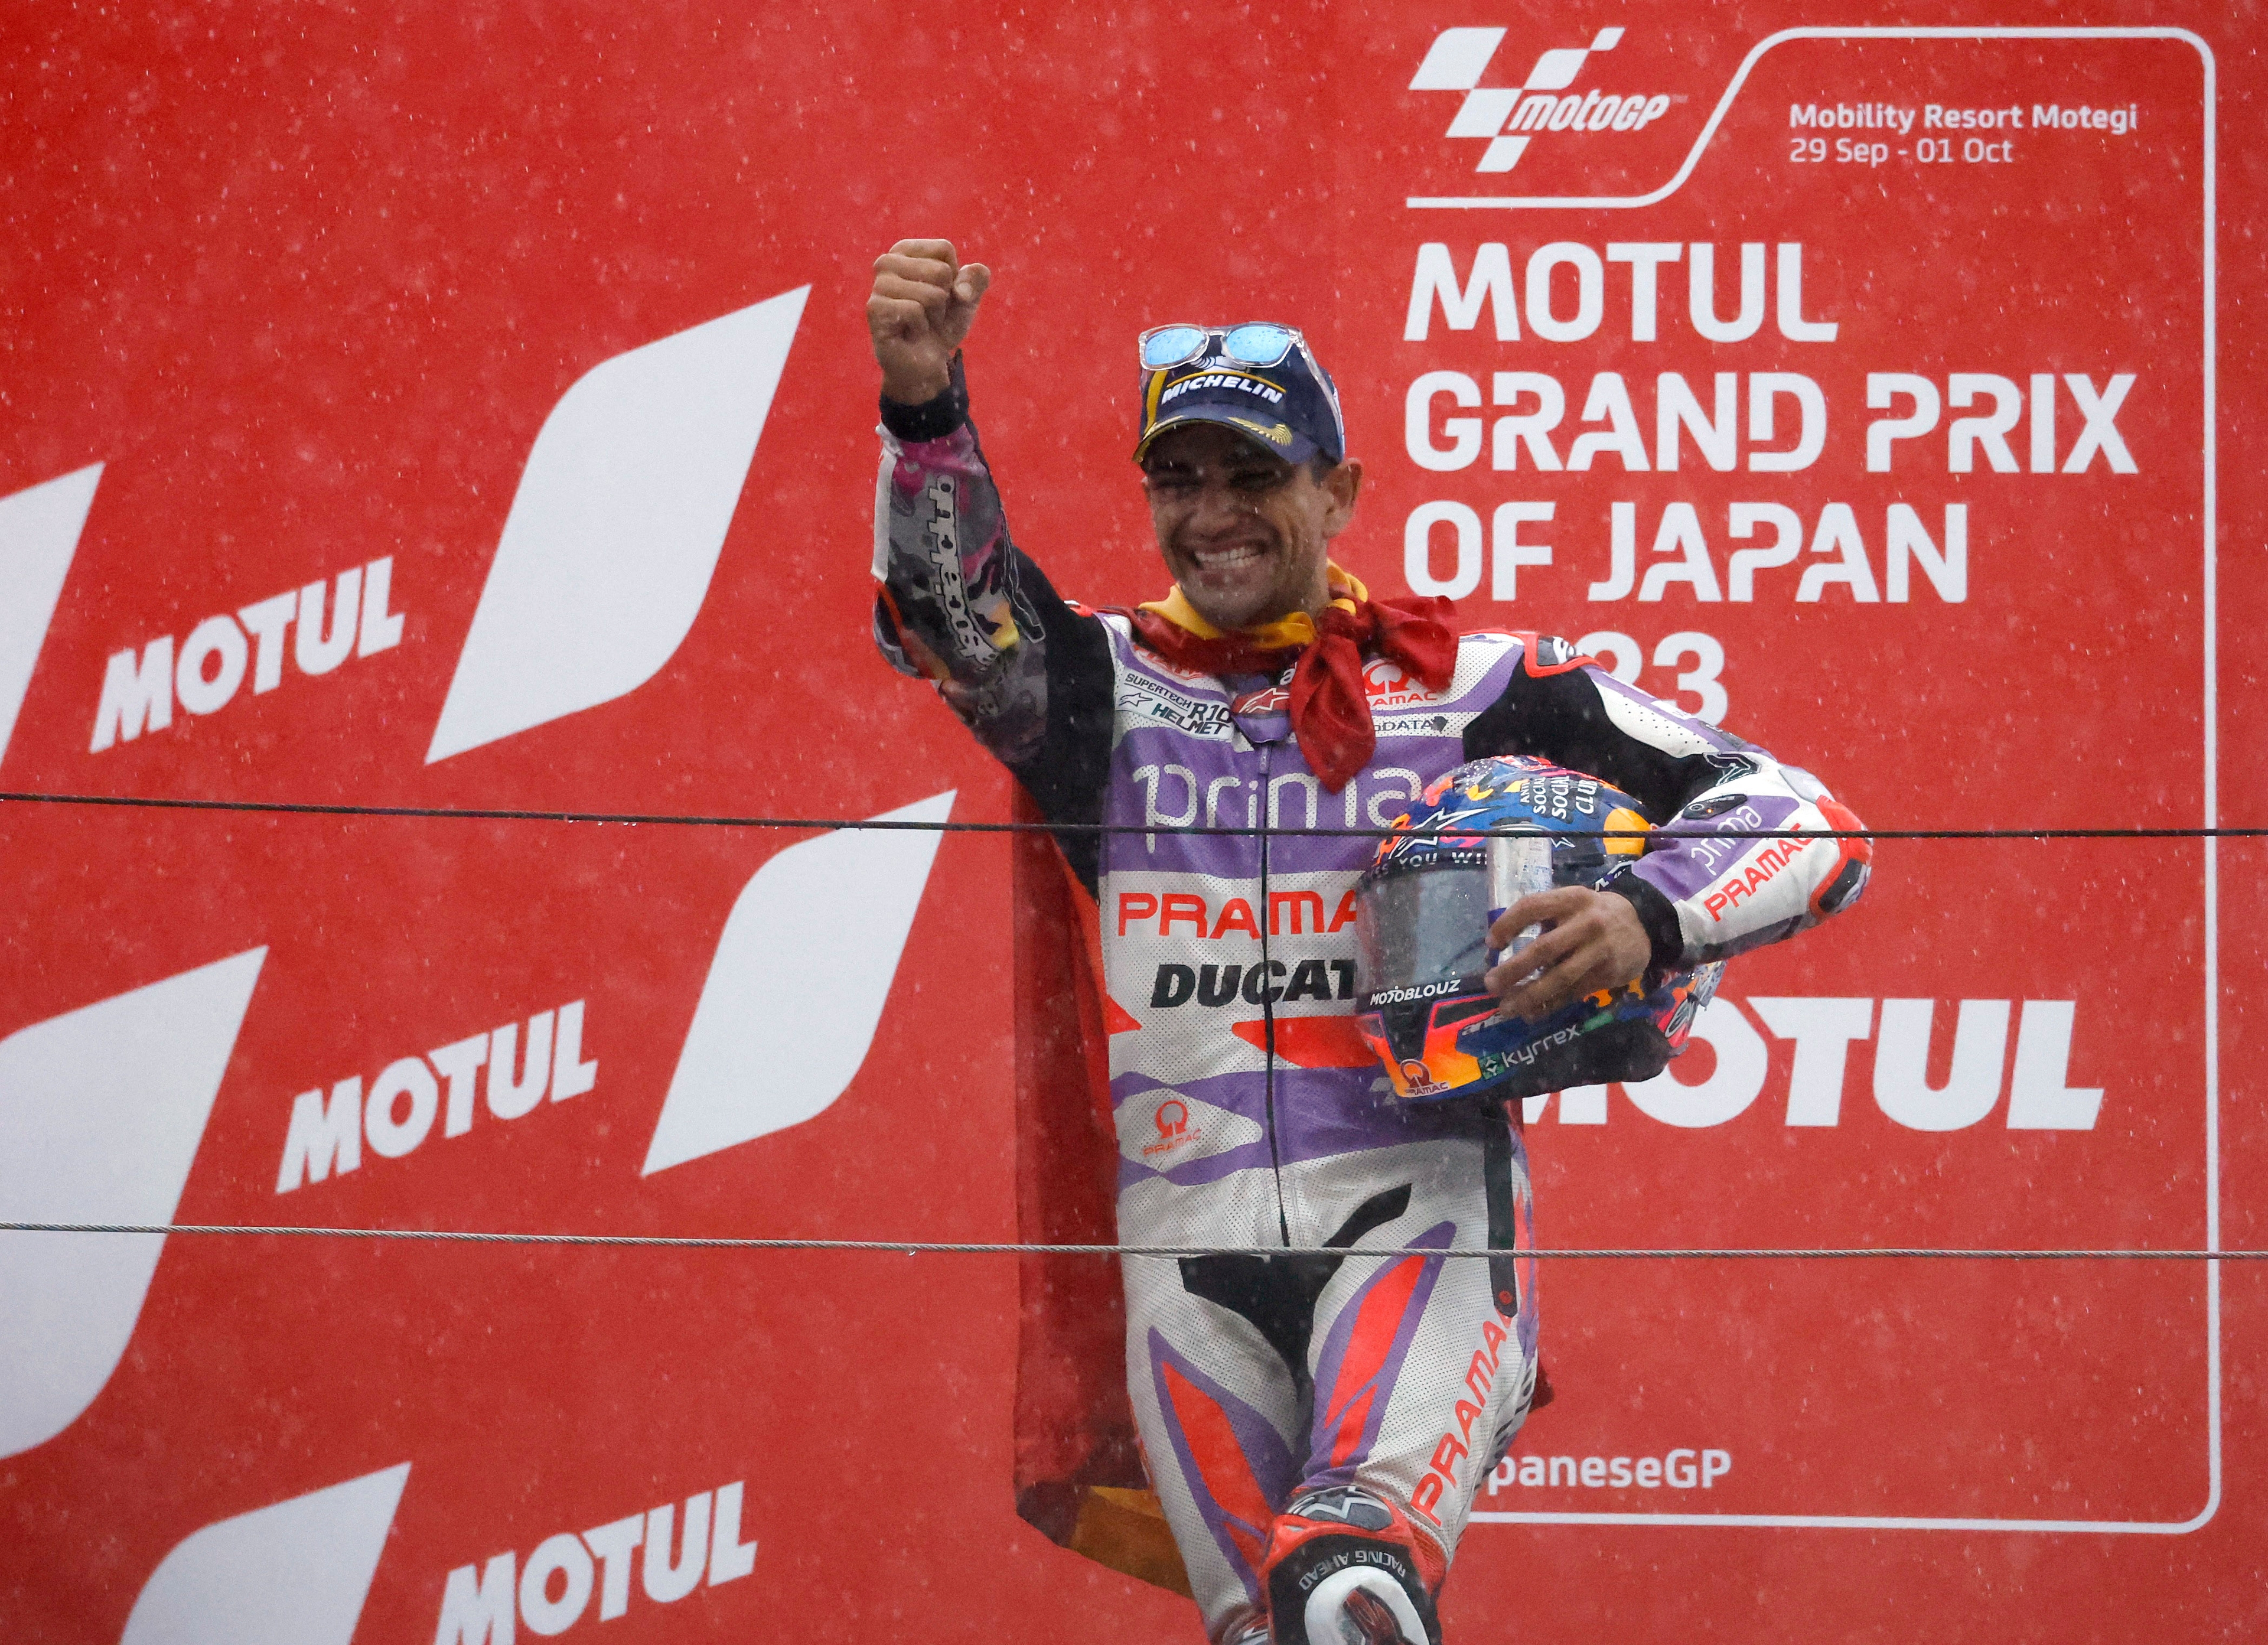 Martin 3 points off Bagnaia with wet Japan MotoGP win | beIN SPORTS